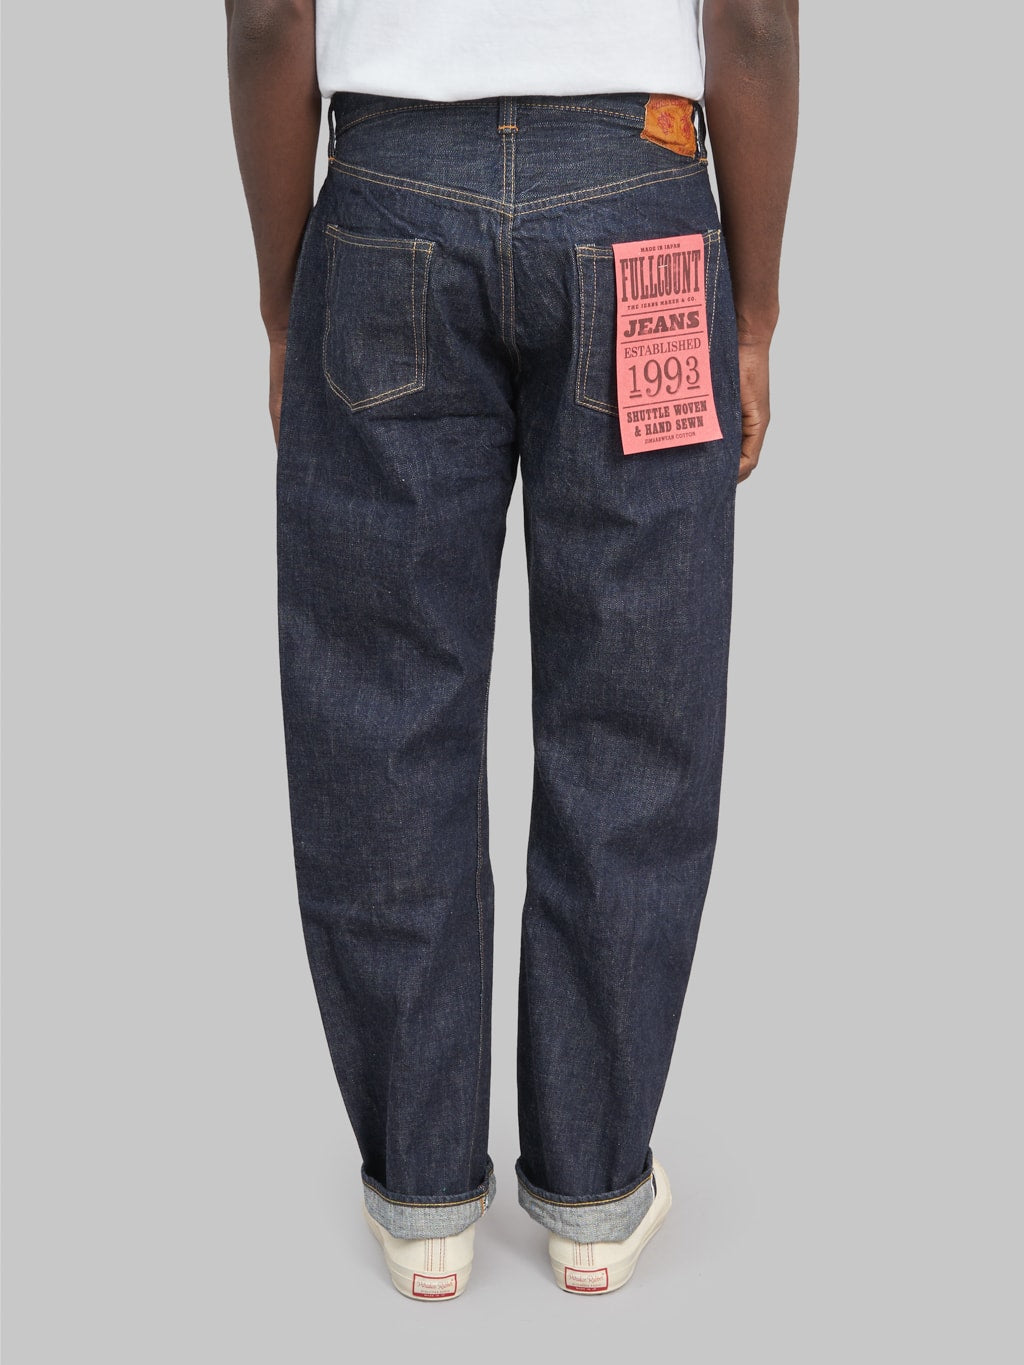 Fullcount 0105W 13.7oz Wide Straight Jeans